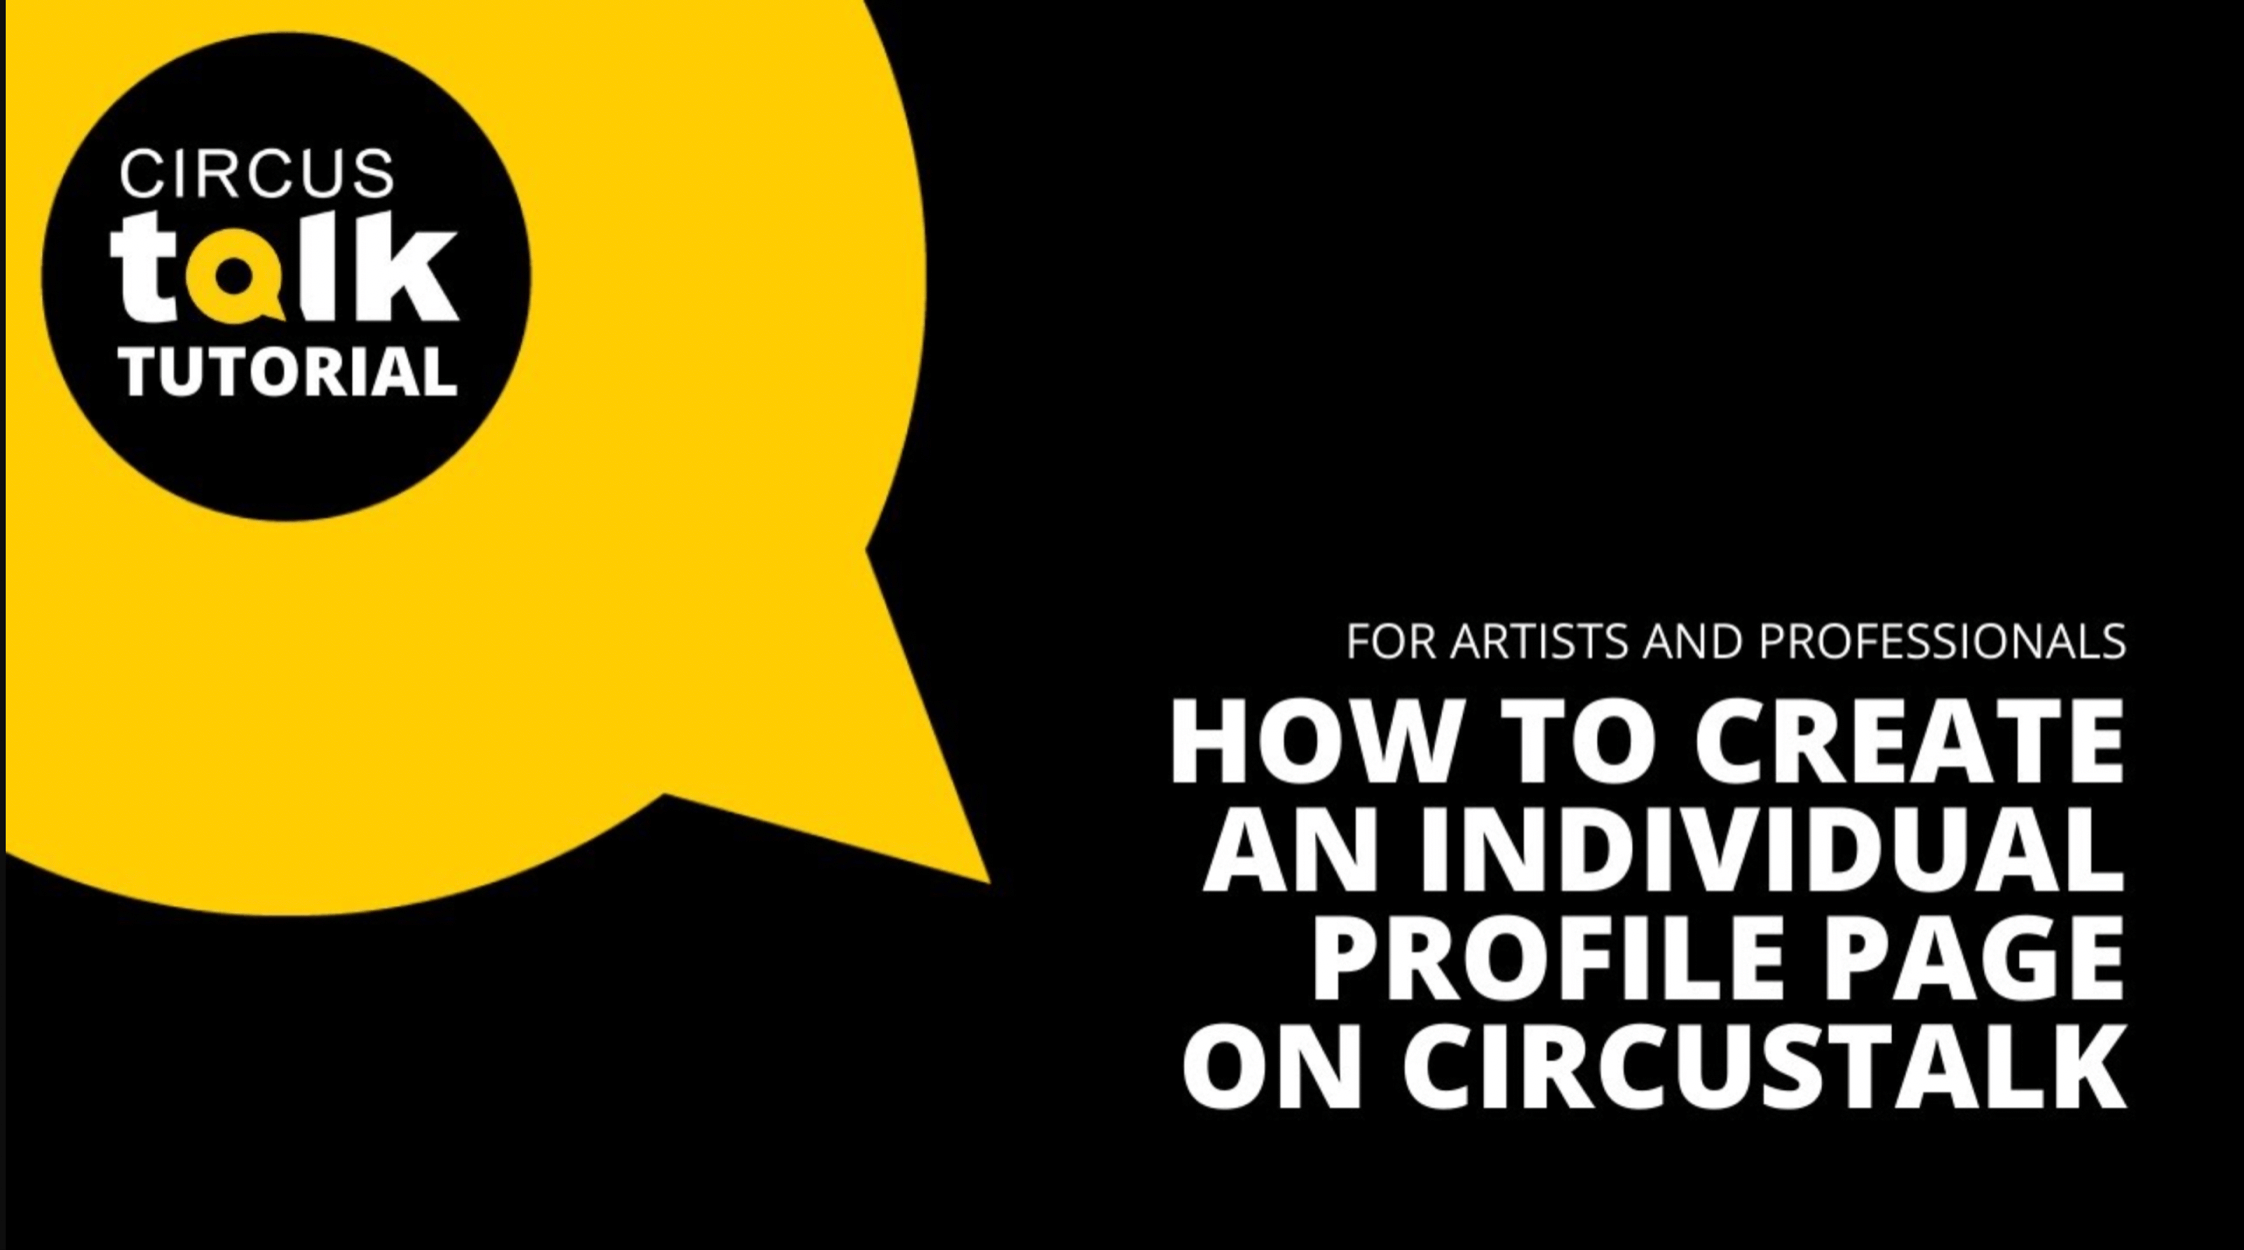 How to Create an Individual Profile Page on CircusTalk